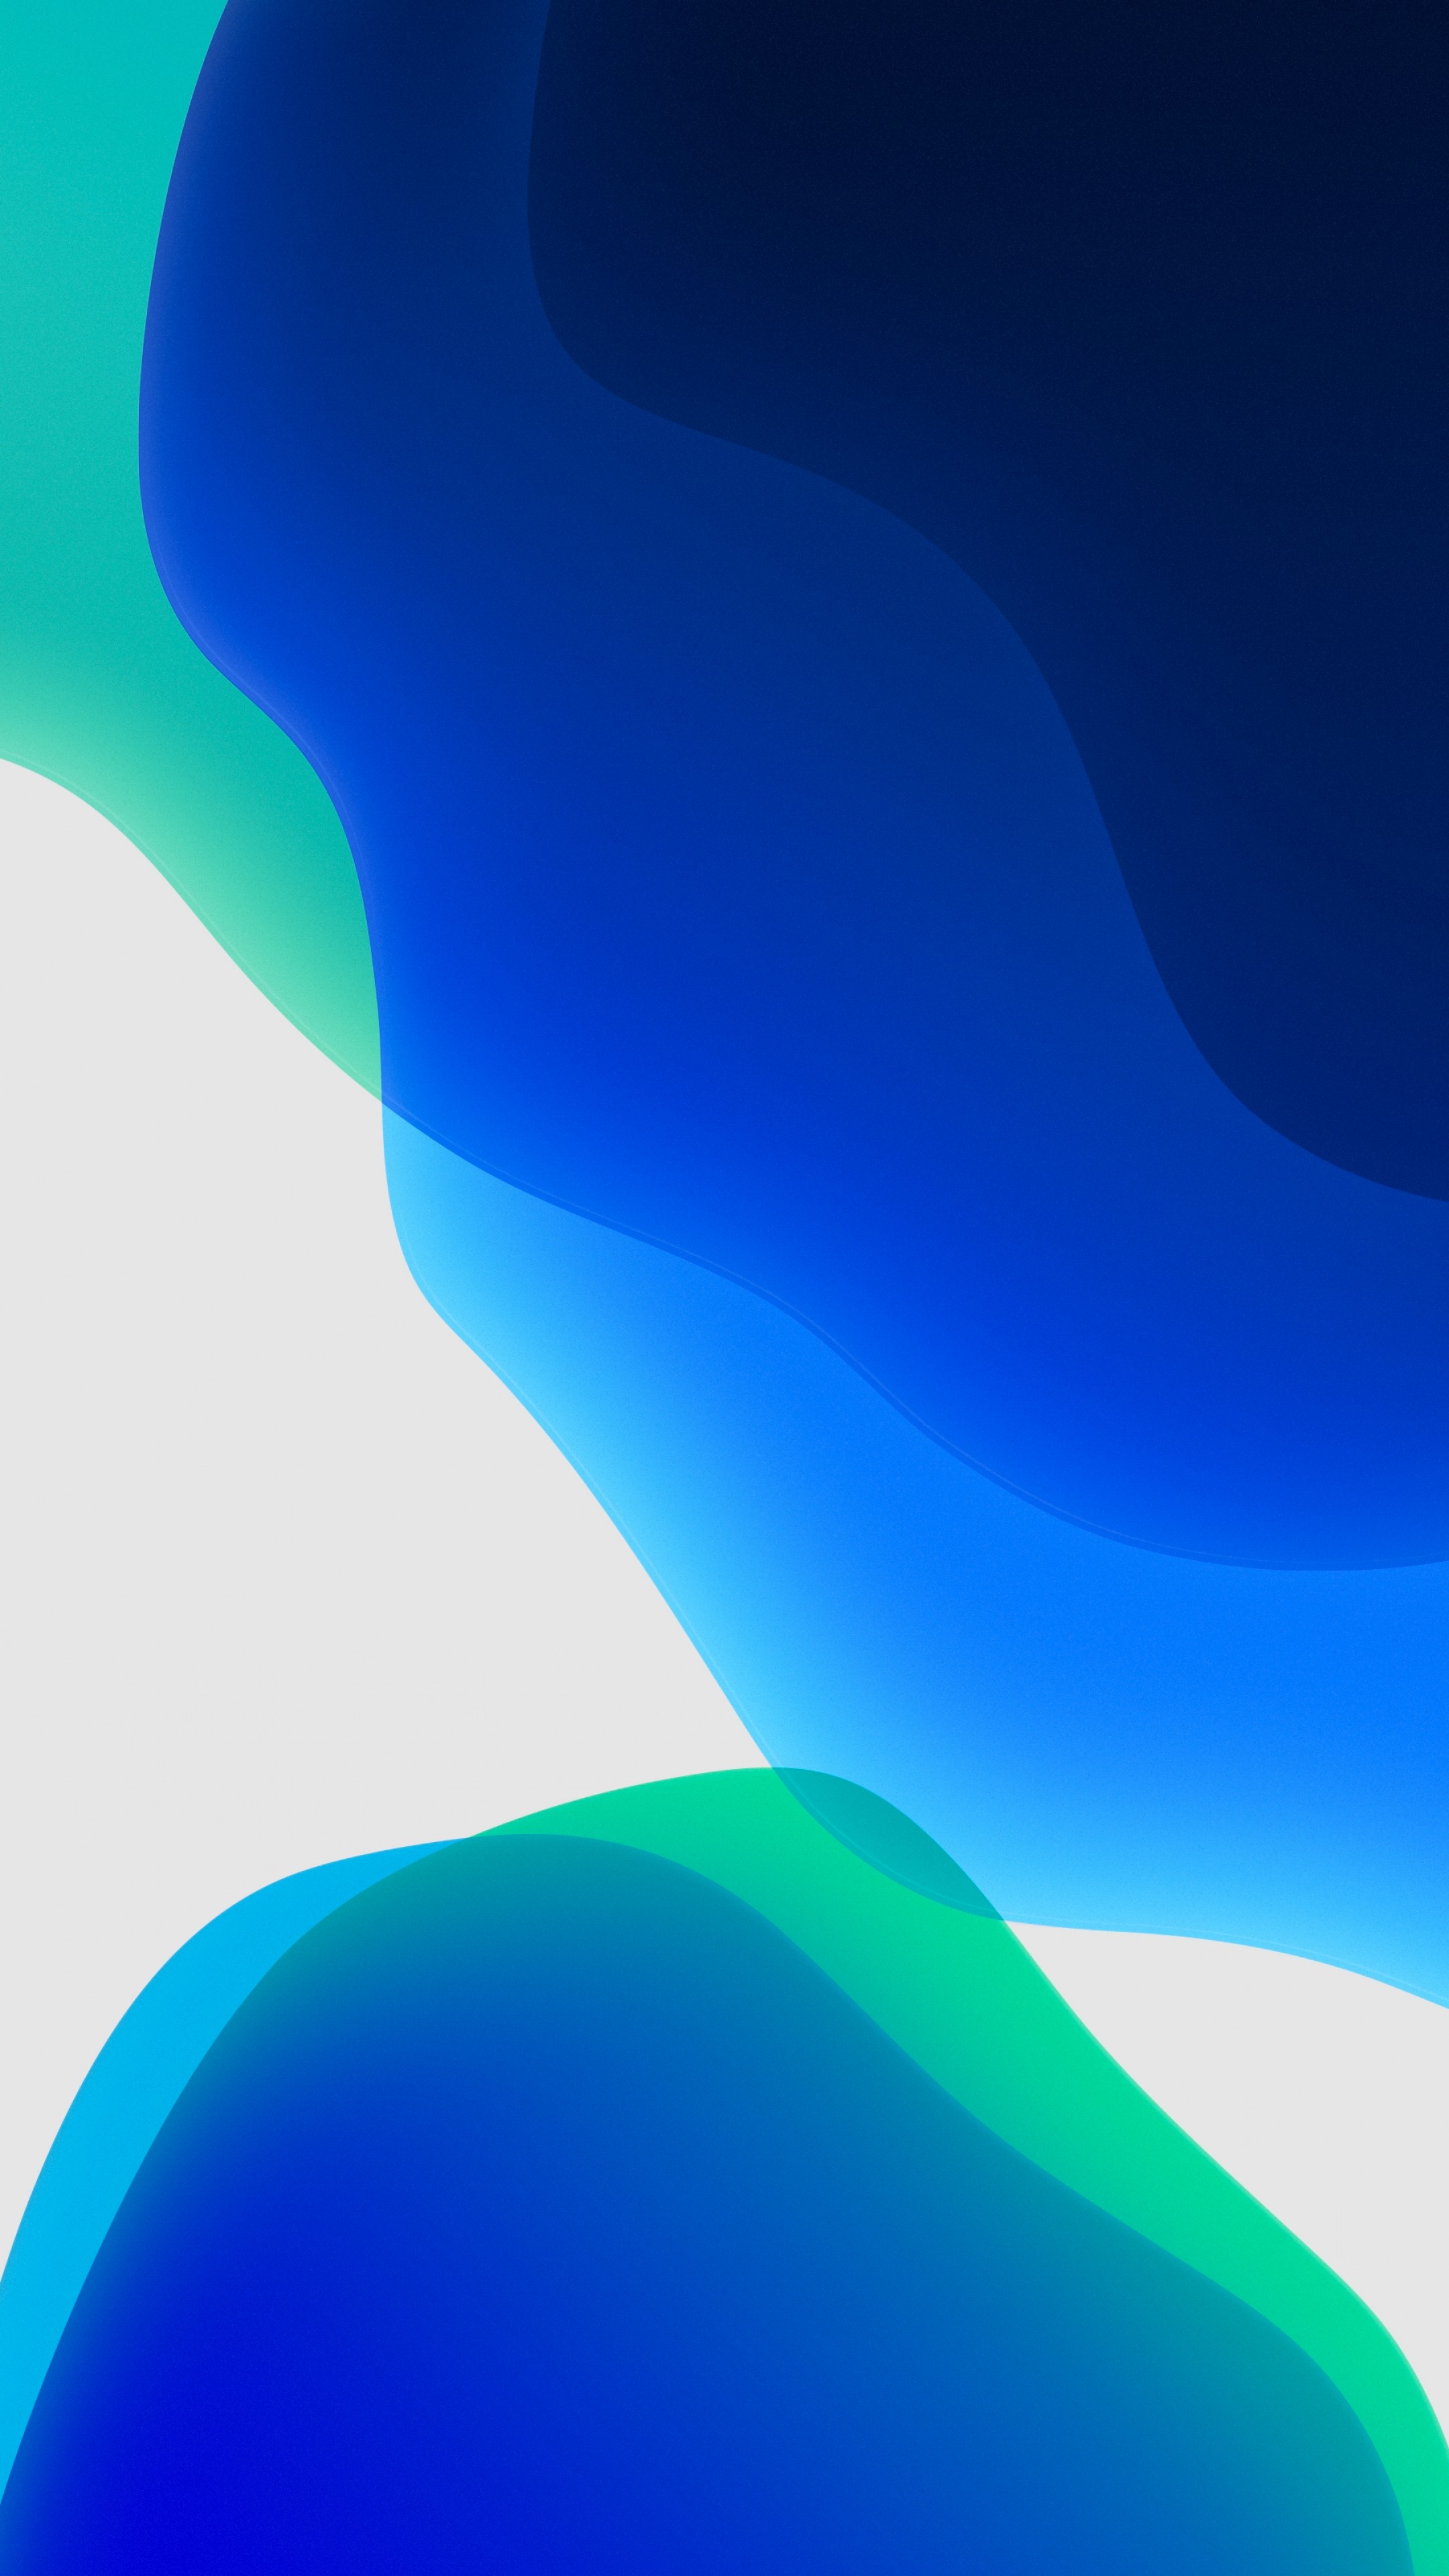 Ios 13 Wallpapers For Iphone - 2160x3840 Wallpaper 